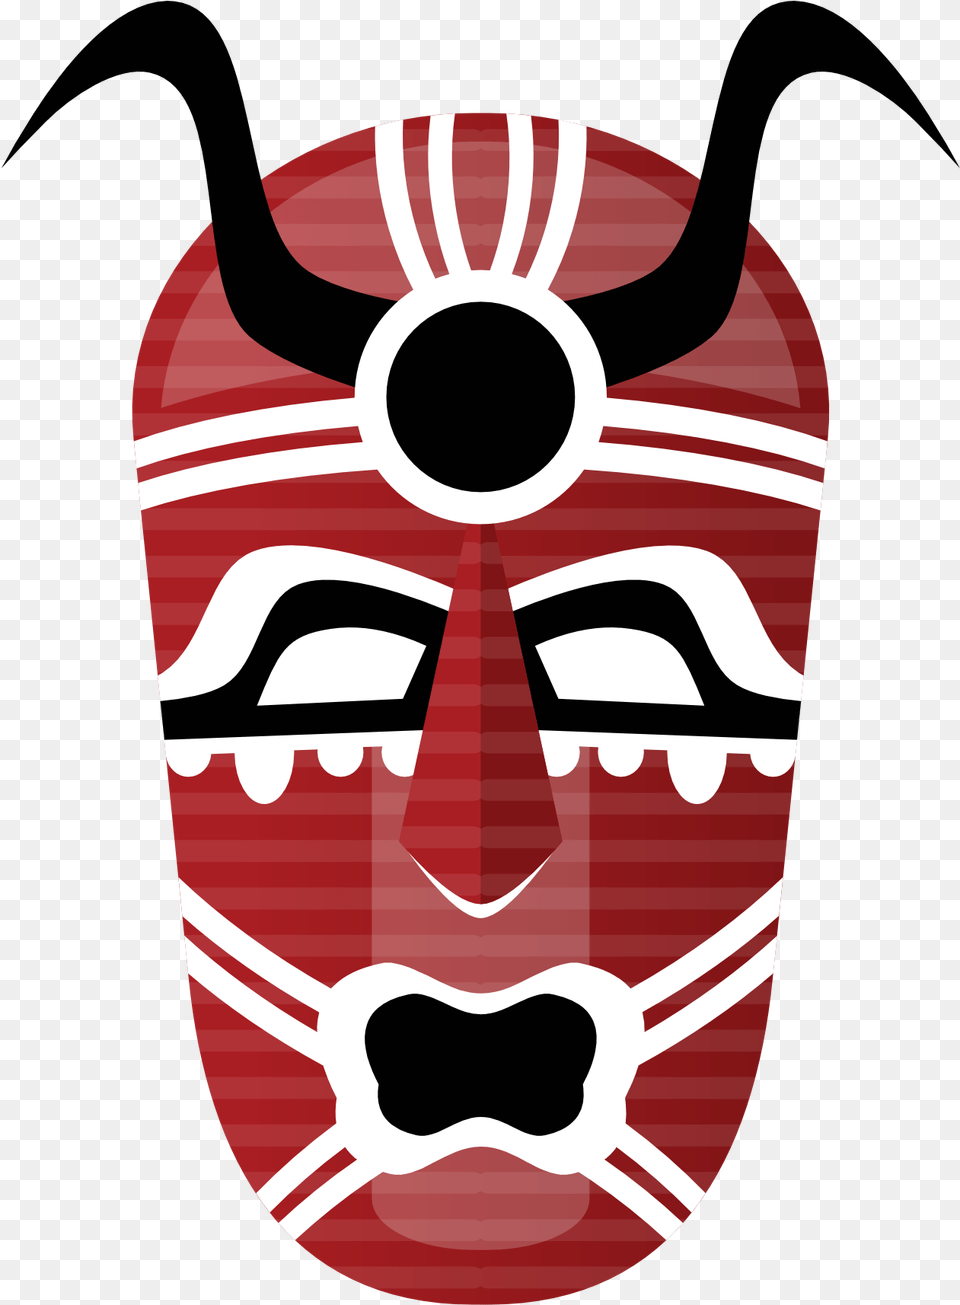 Voodoo Masks From Princess And The Frog, Mask, Dynamite, Weapon Free Transparent Png